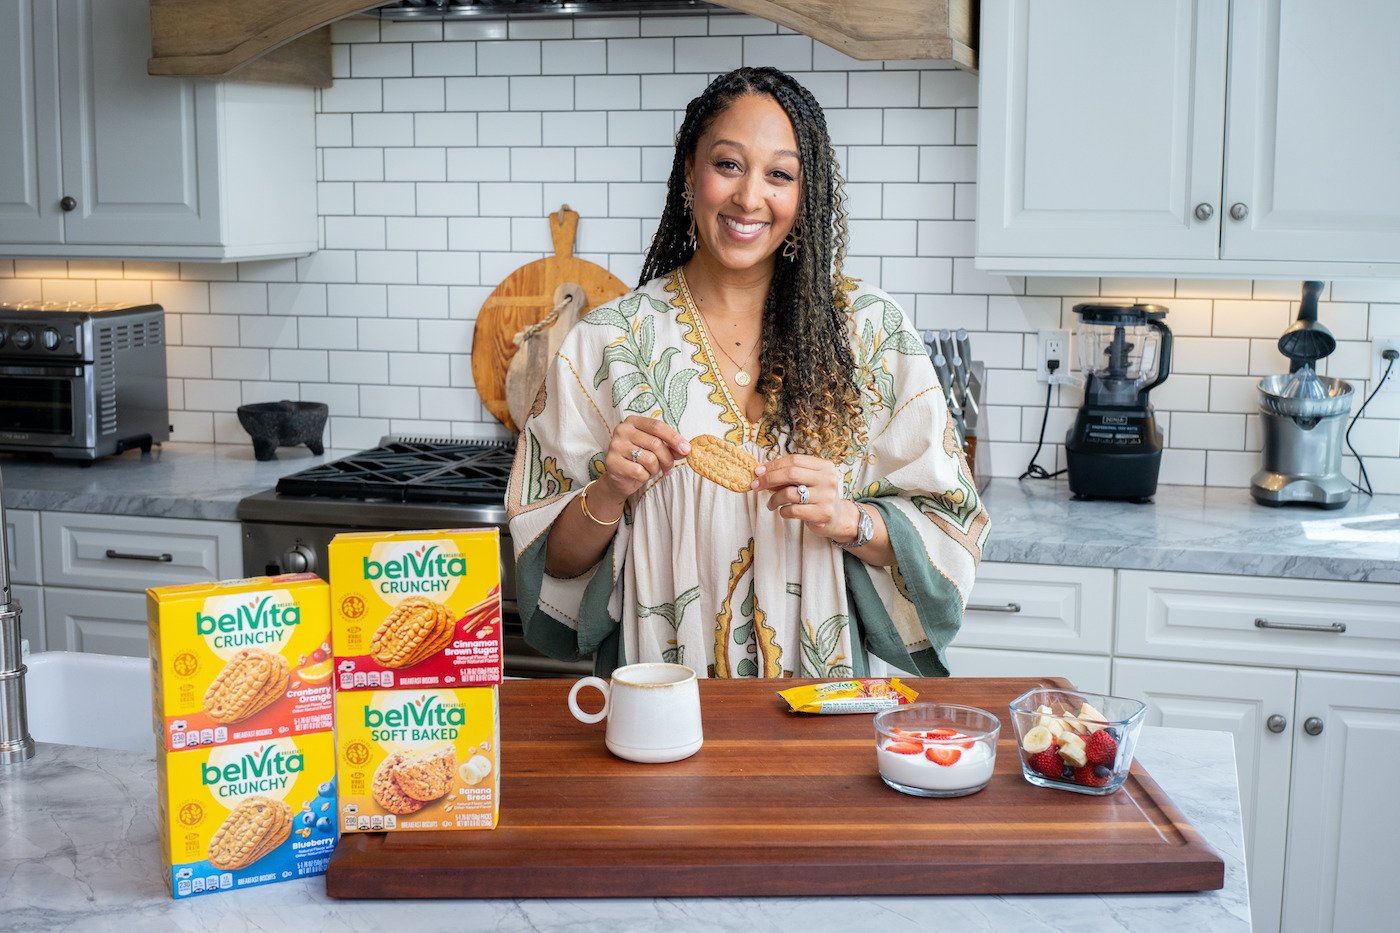 Tamera Mowry-Housley holds a belVita biscuit in her kitchen